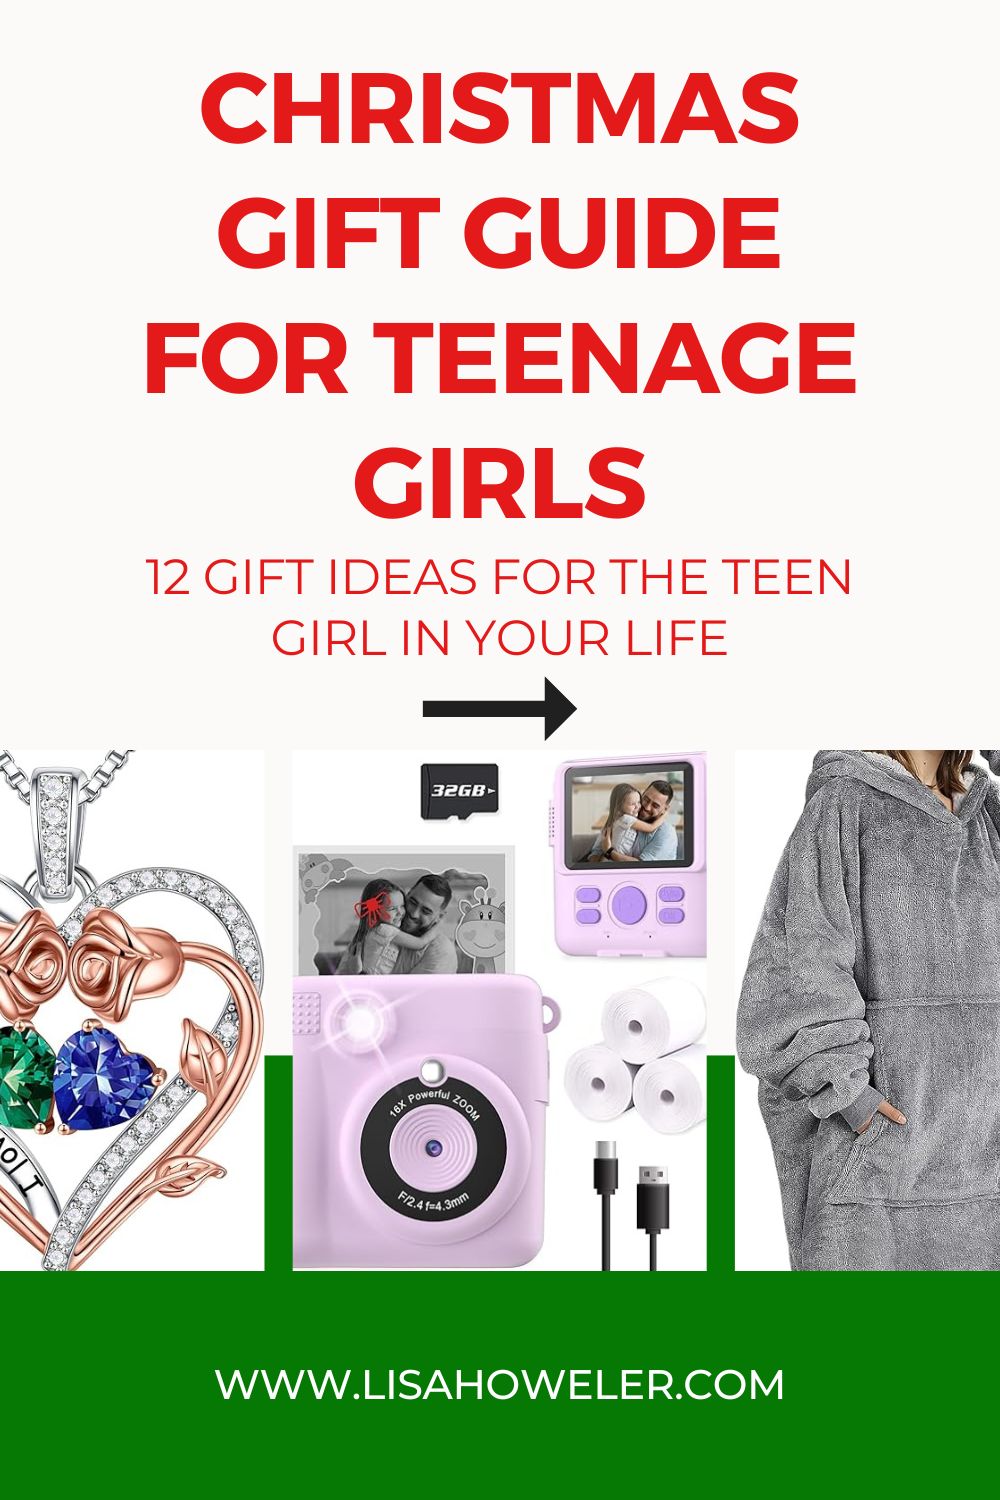 Best Gifts for Teen Girls, According to a 16 Year Old